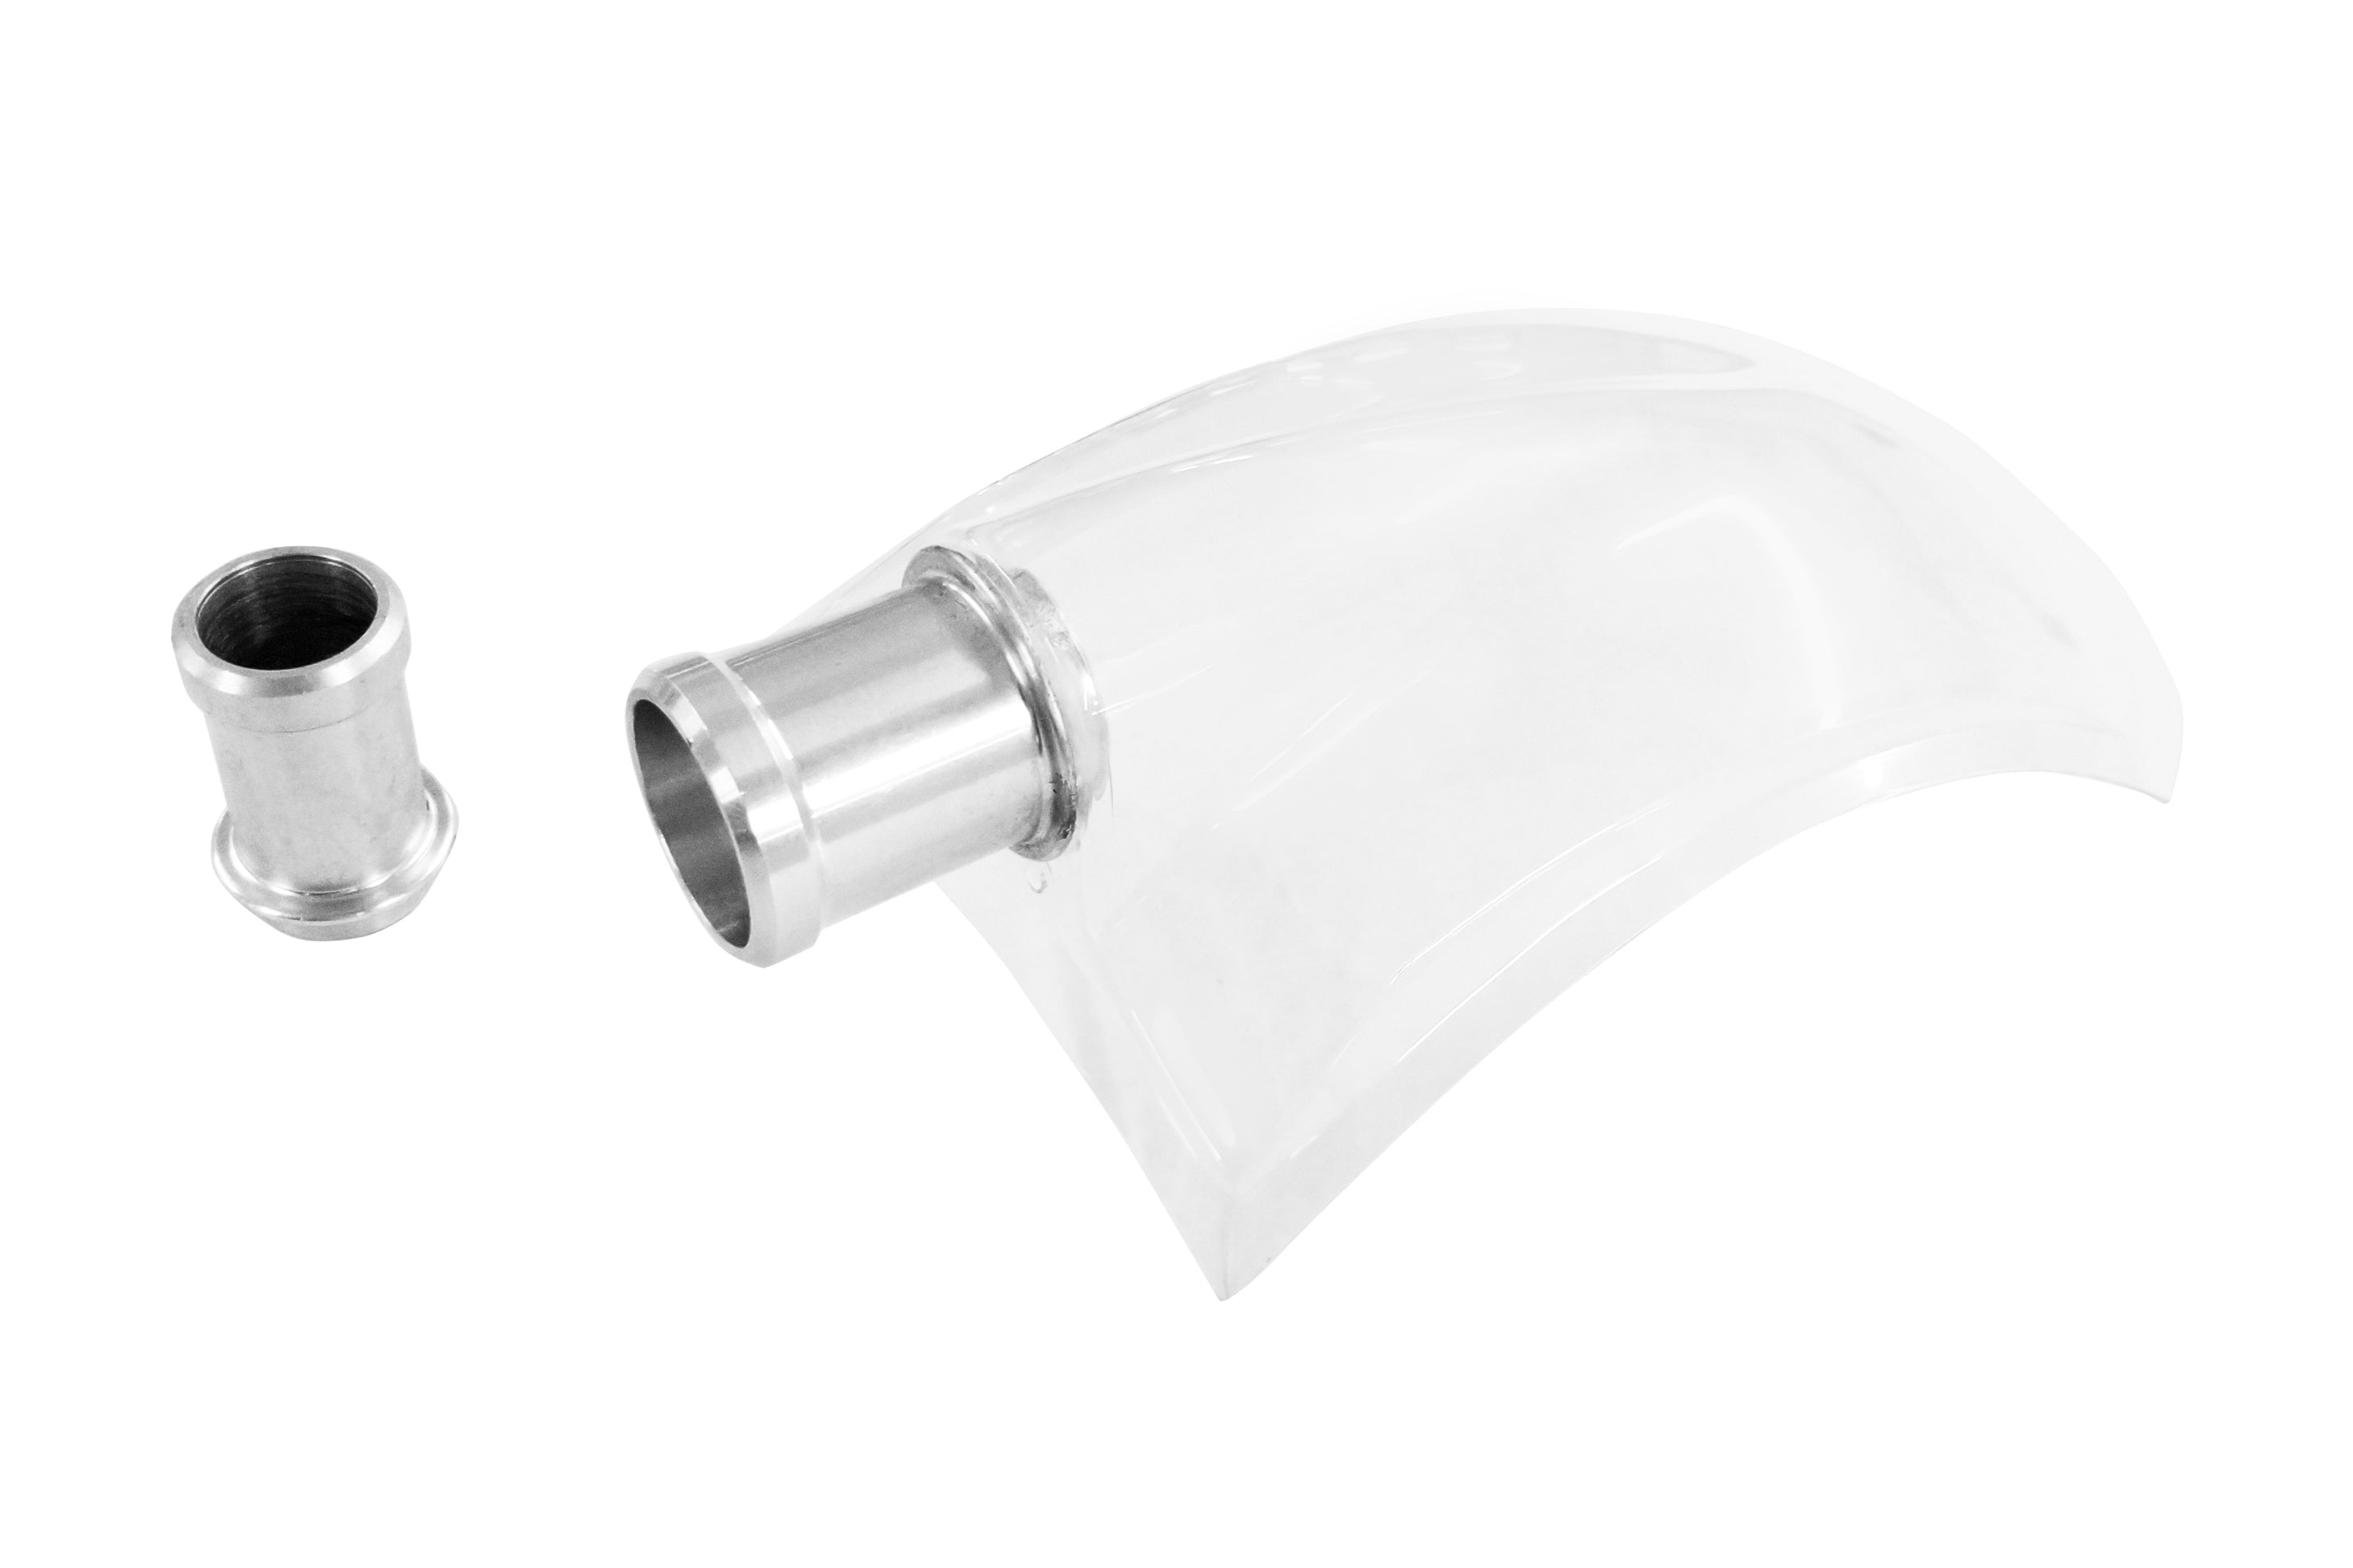 SCHUBERTH 1010008096 Forced air scoop clear - Large Connector Prep. with tape SP1 Photo-1 